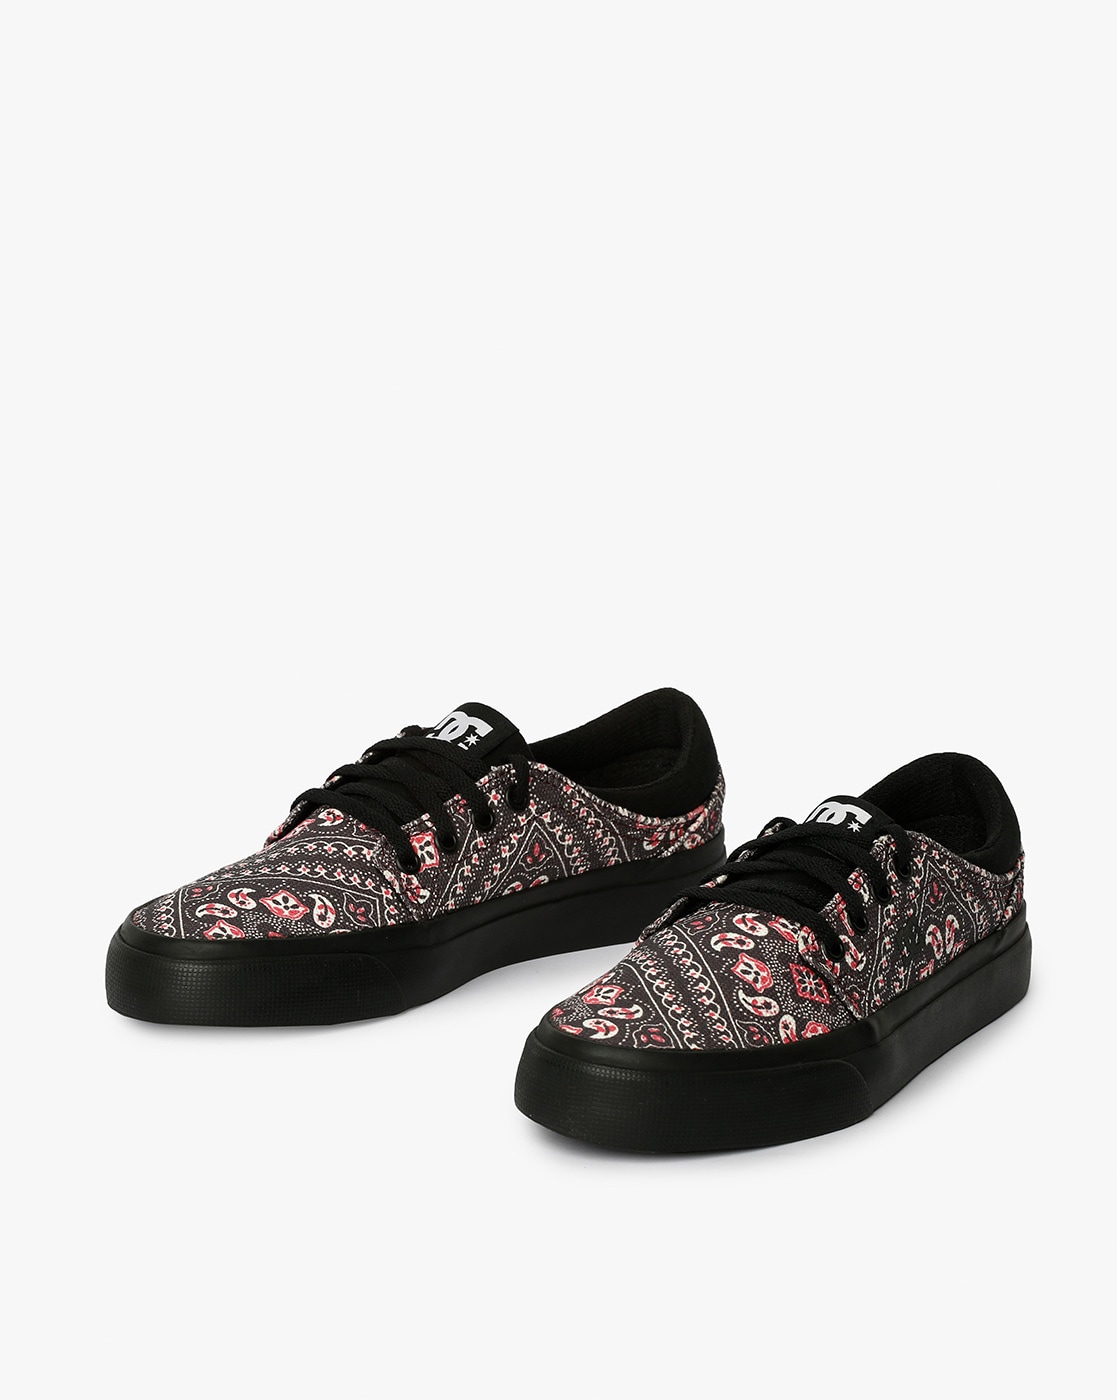 womens dc shoes on sale